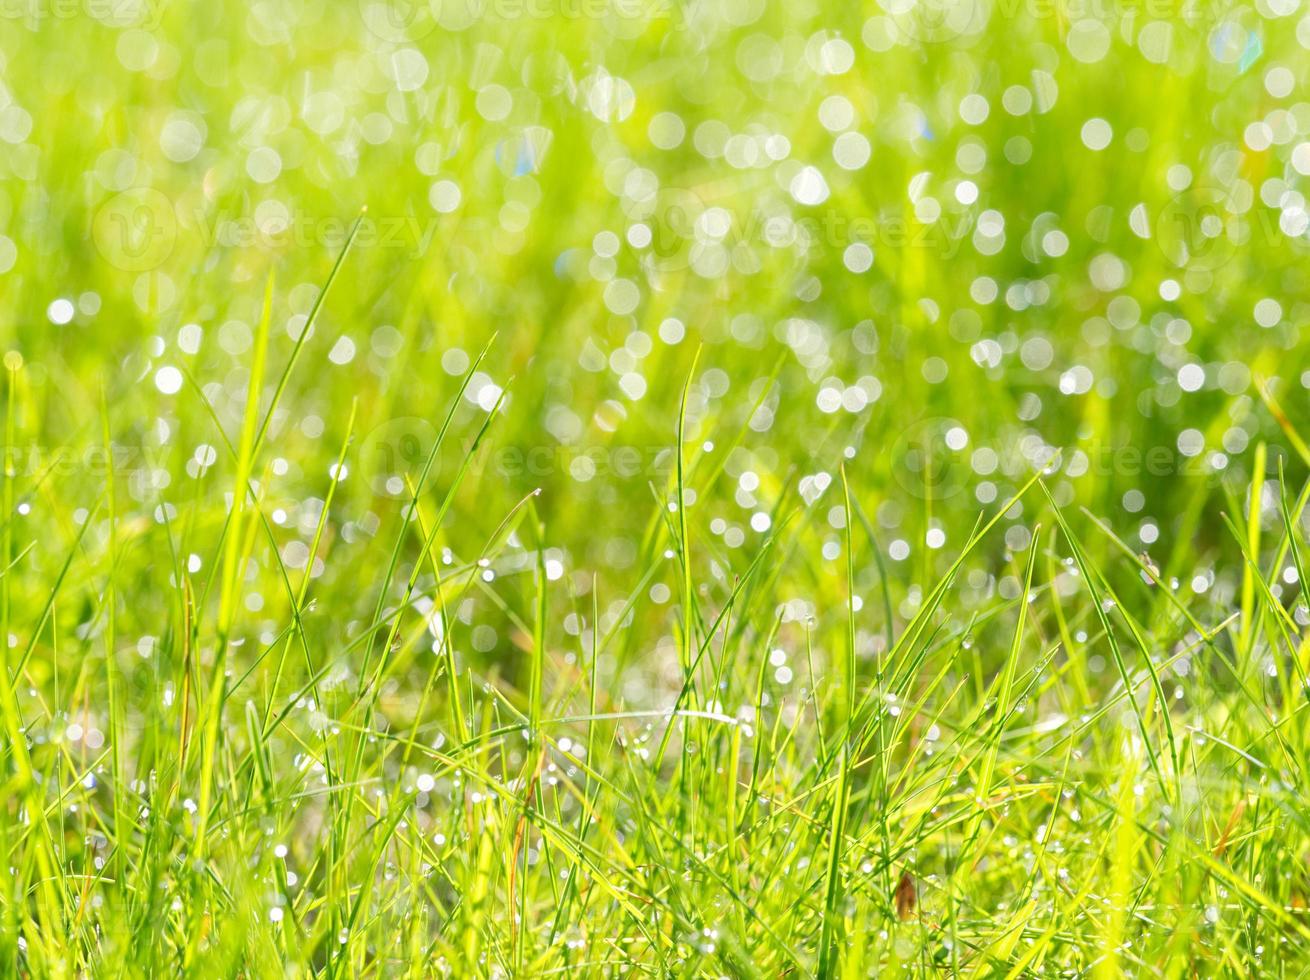 meadow grass with dew drops in sunshine, blurred background, after ...